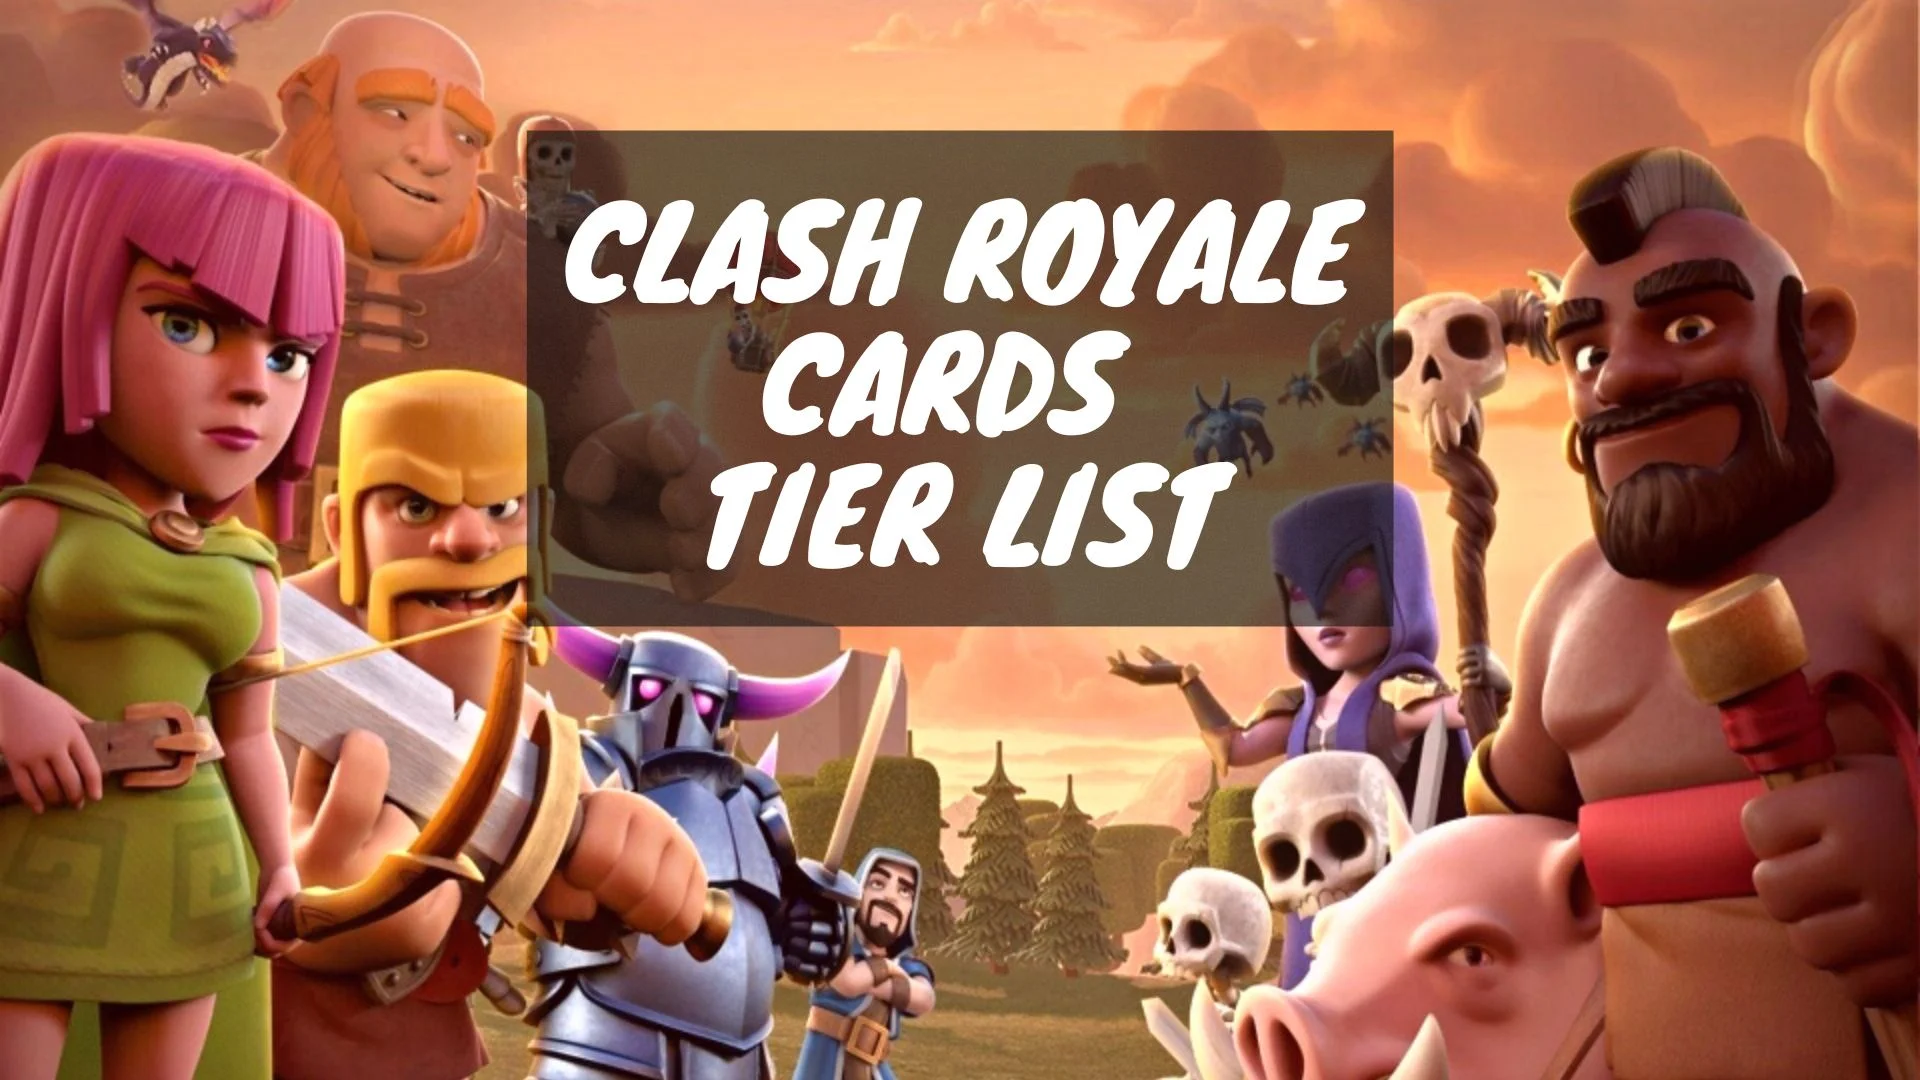 The best decks to win the Clash Royale Dragon Hunting Challenge 